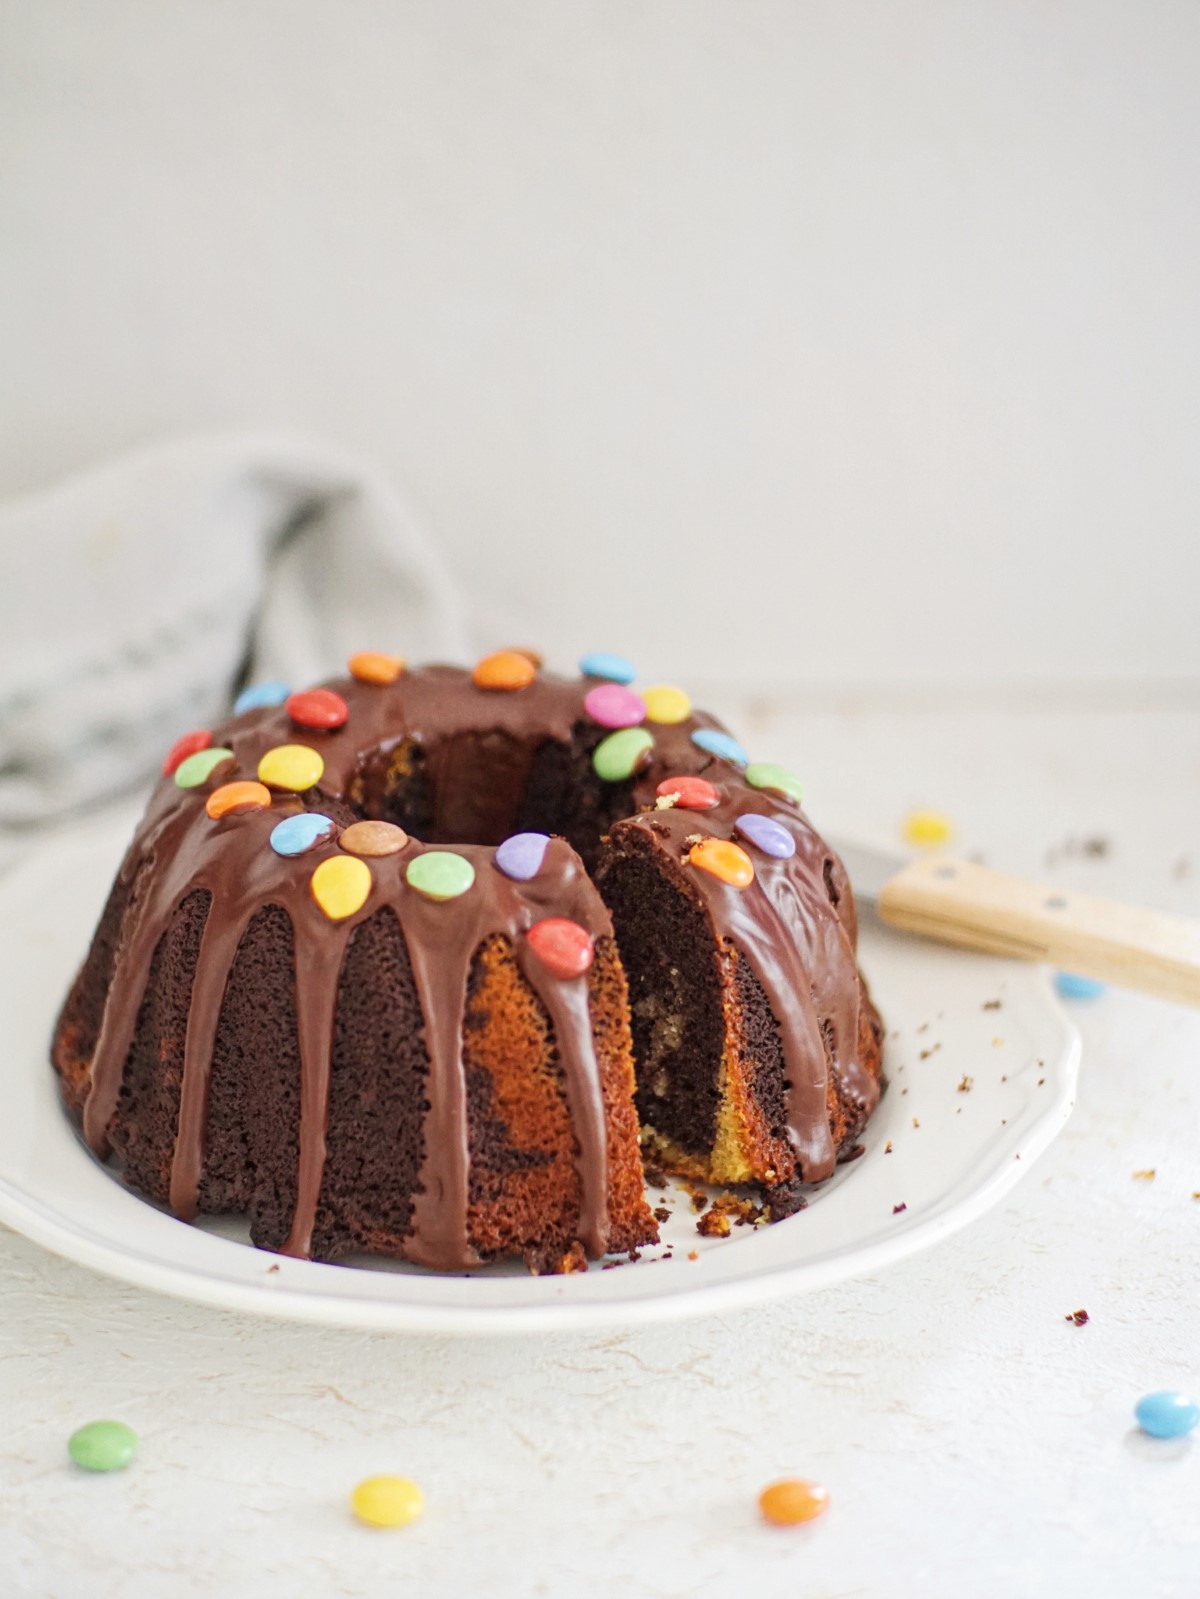 Chocolate Marble Cake  - Title of the Recipe